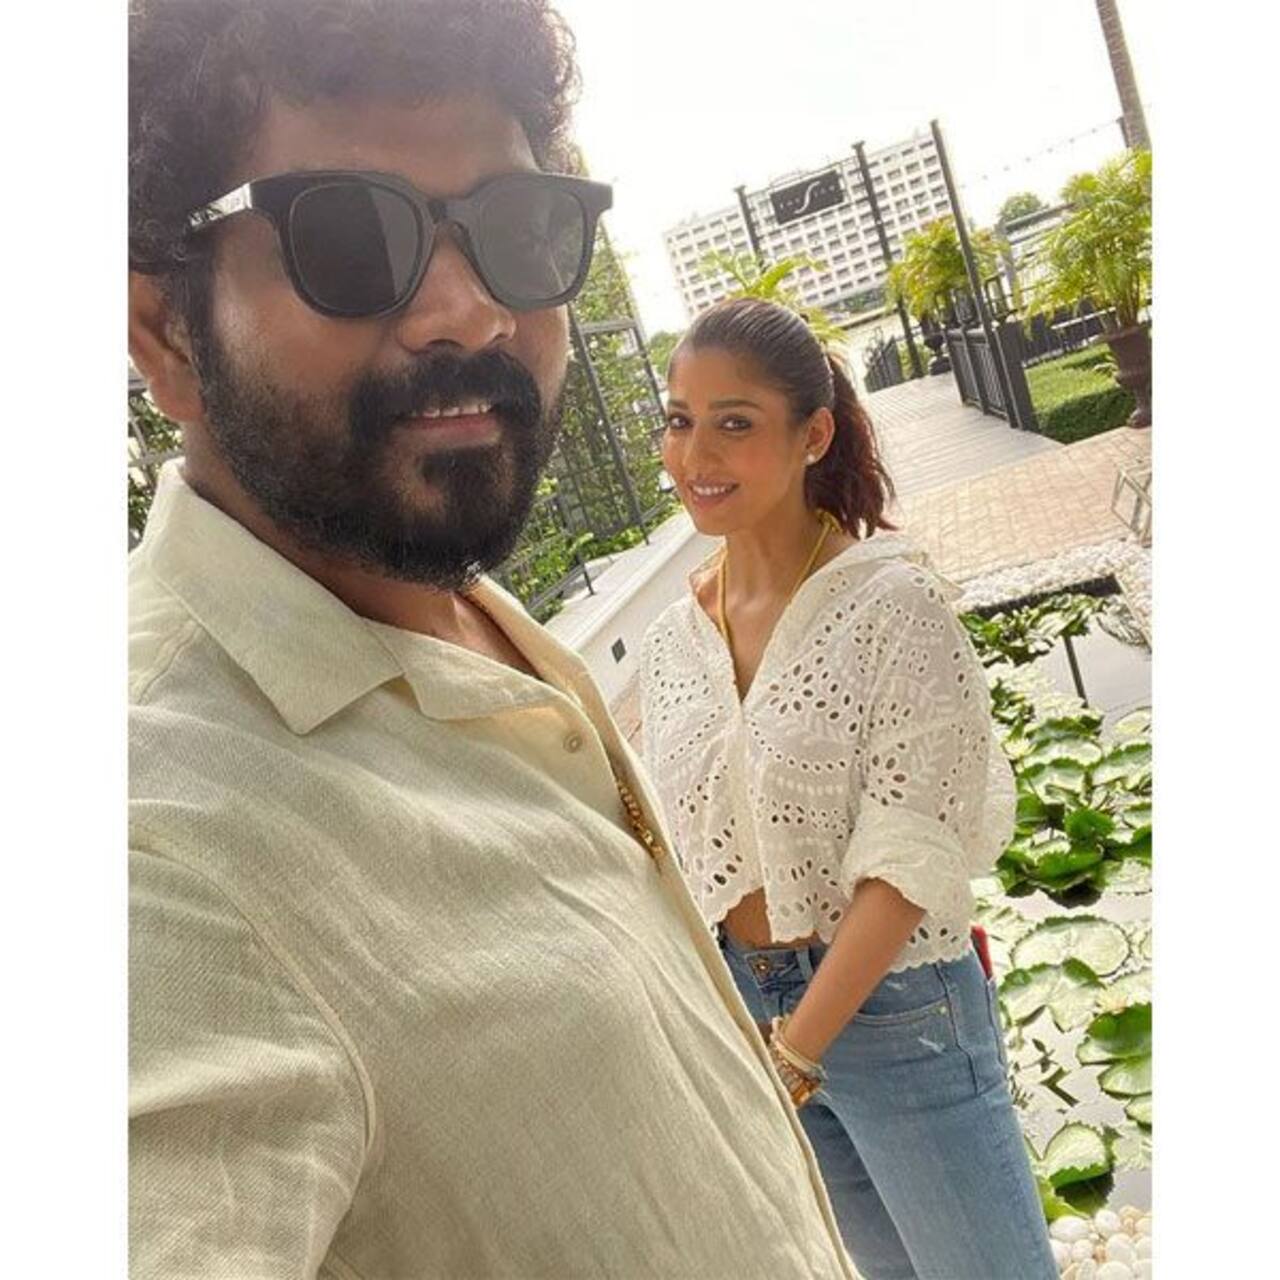 Nayanthara and Vignesh Shivan's selfie picture is amazing!